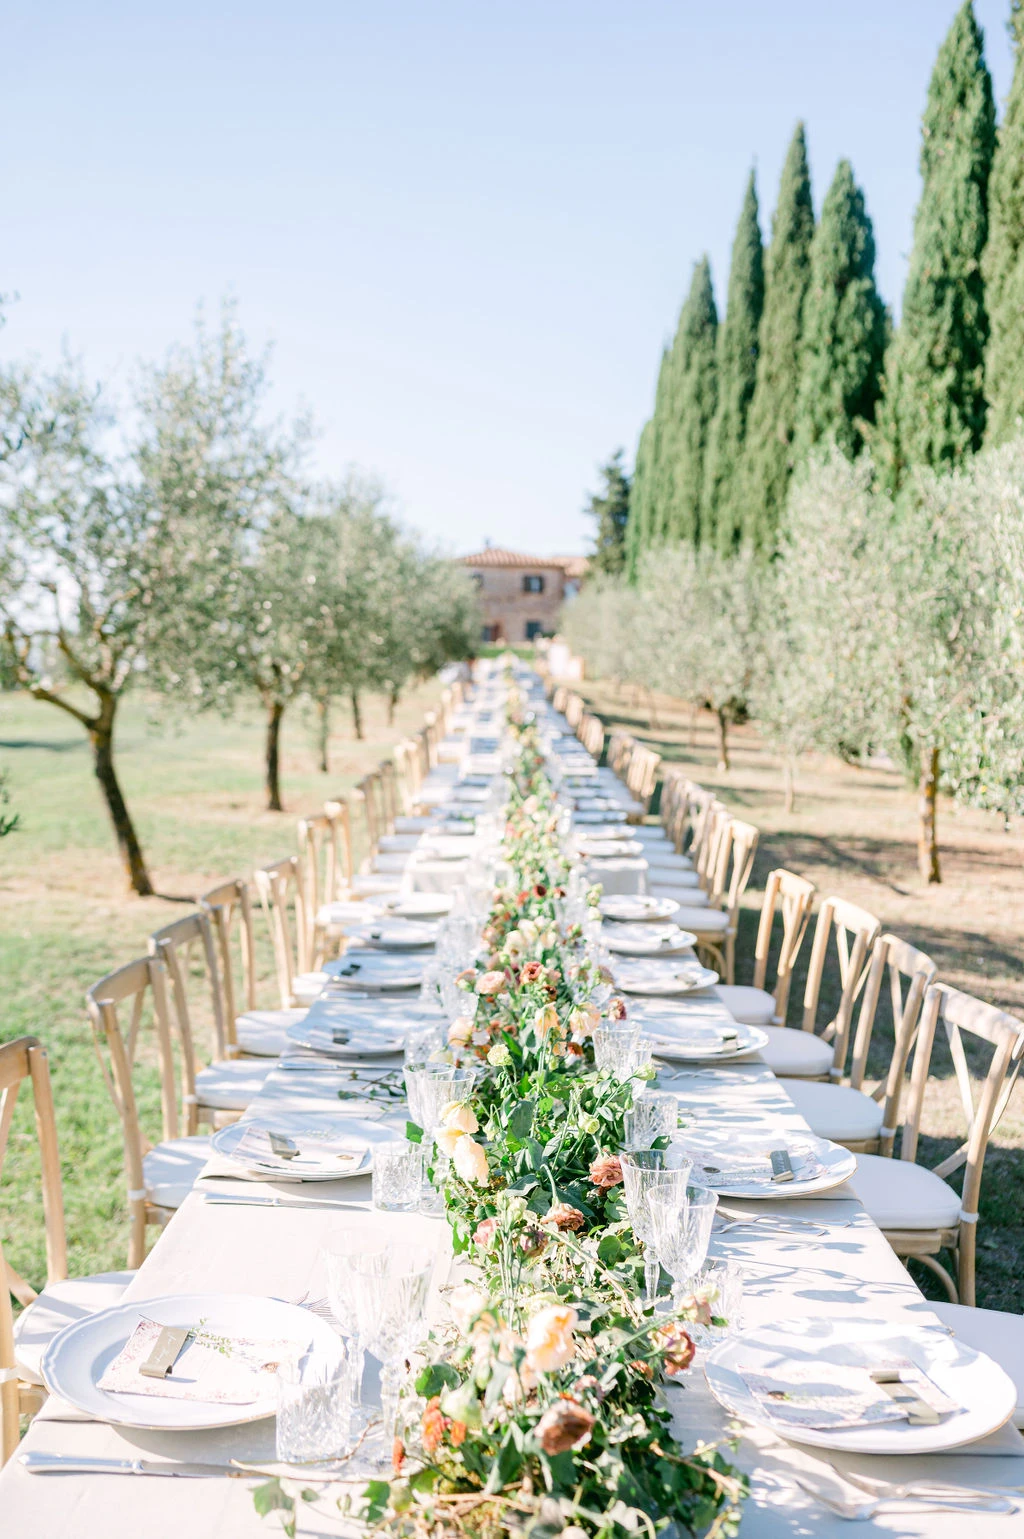 Dinner in the olive grove with breathtaking views over the countryside